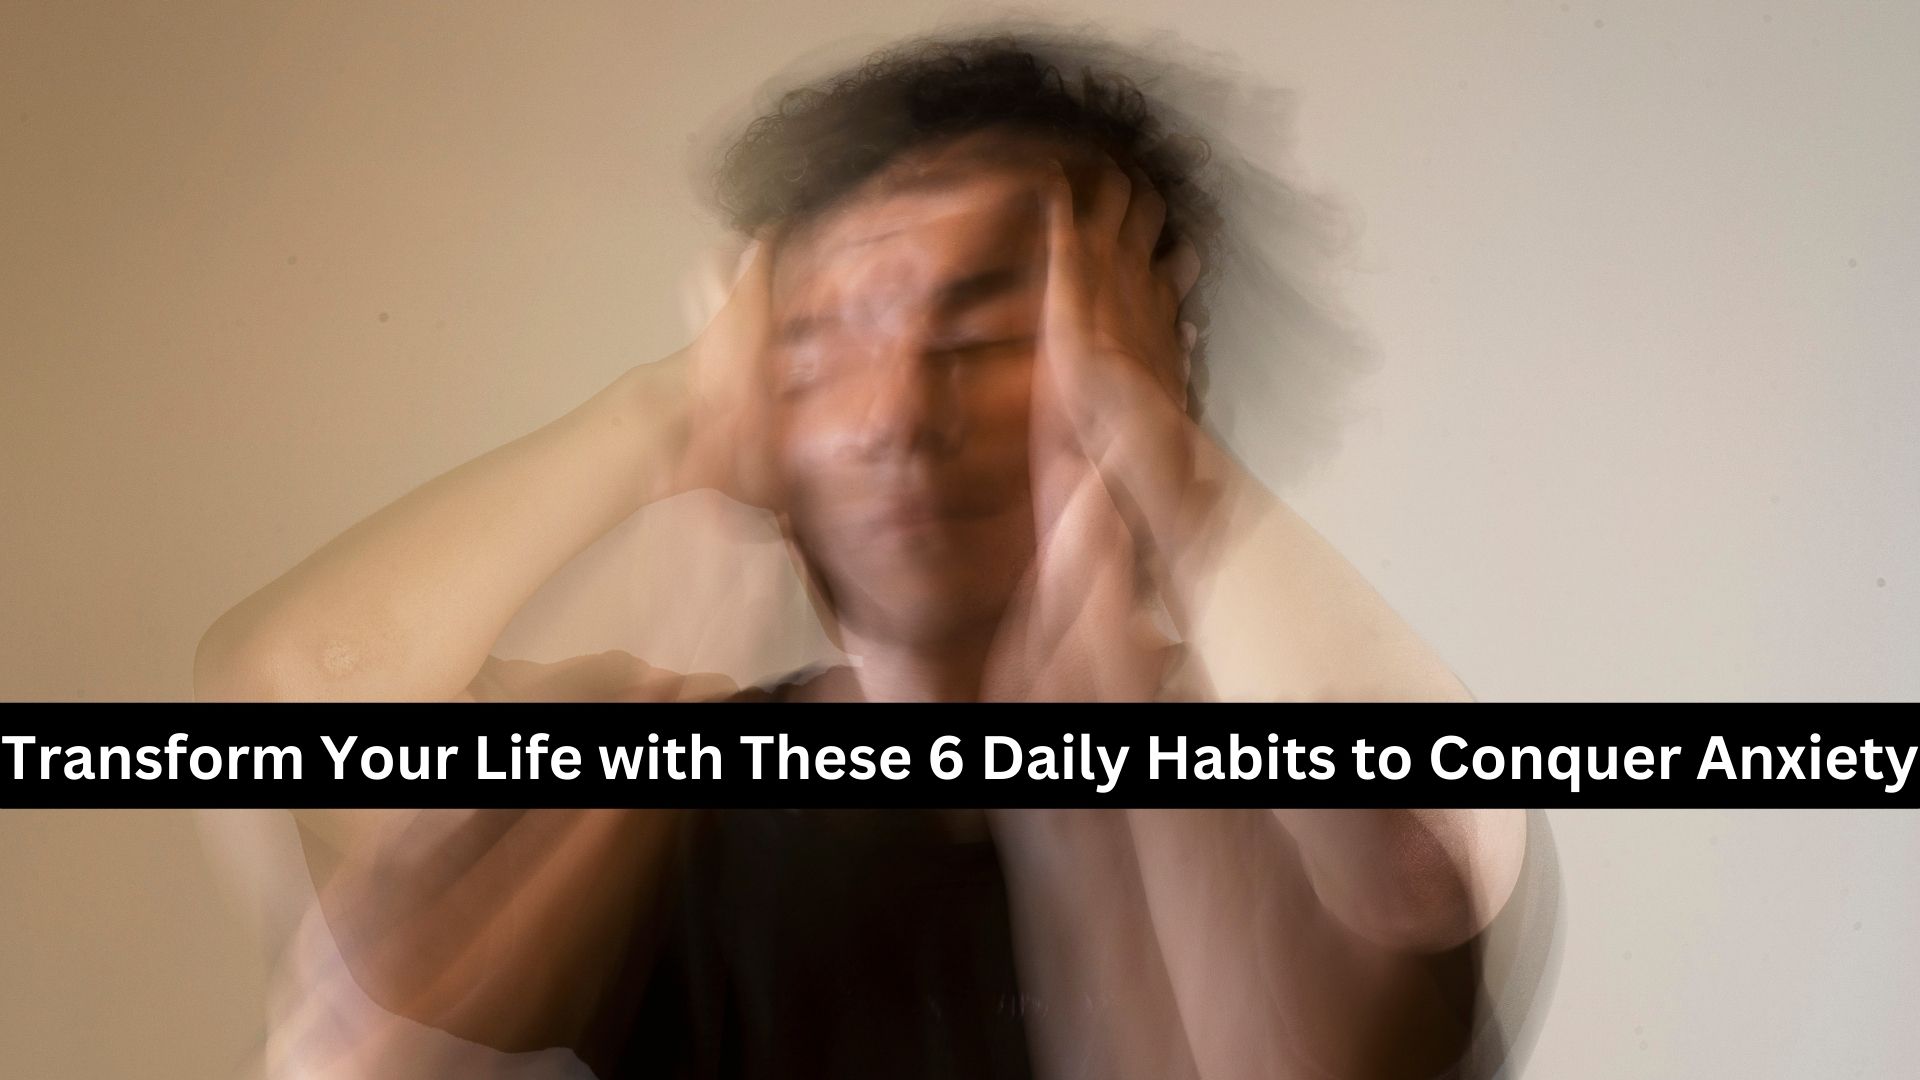 Transform Your Life with These 6 Daily Habits to Conquer Anxiety